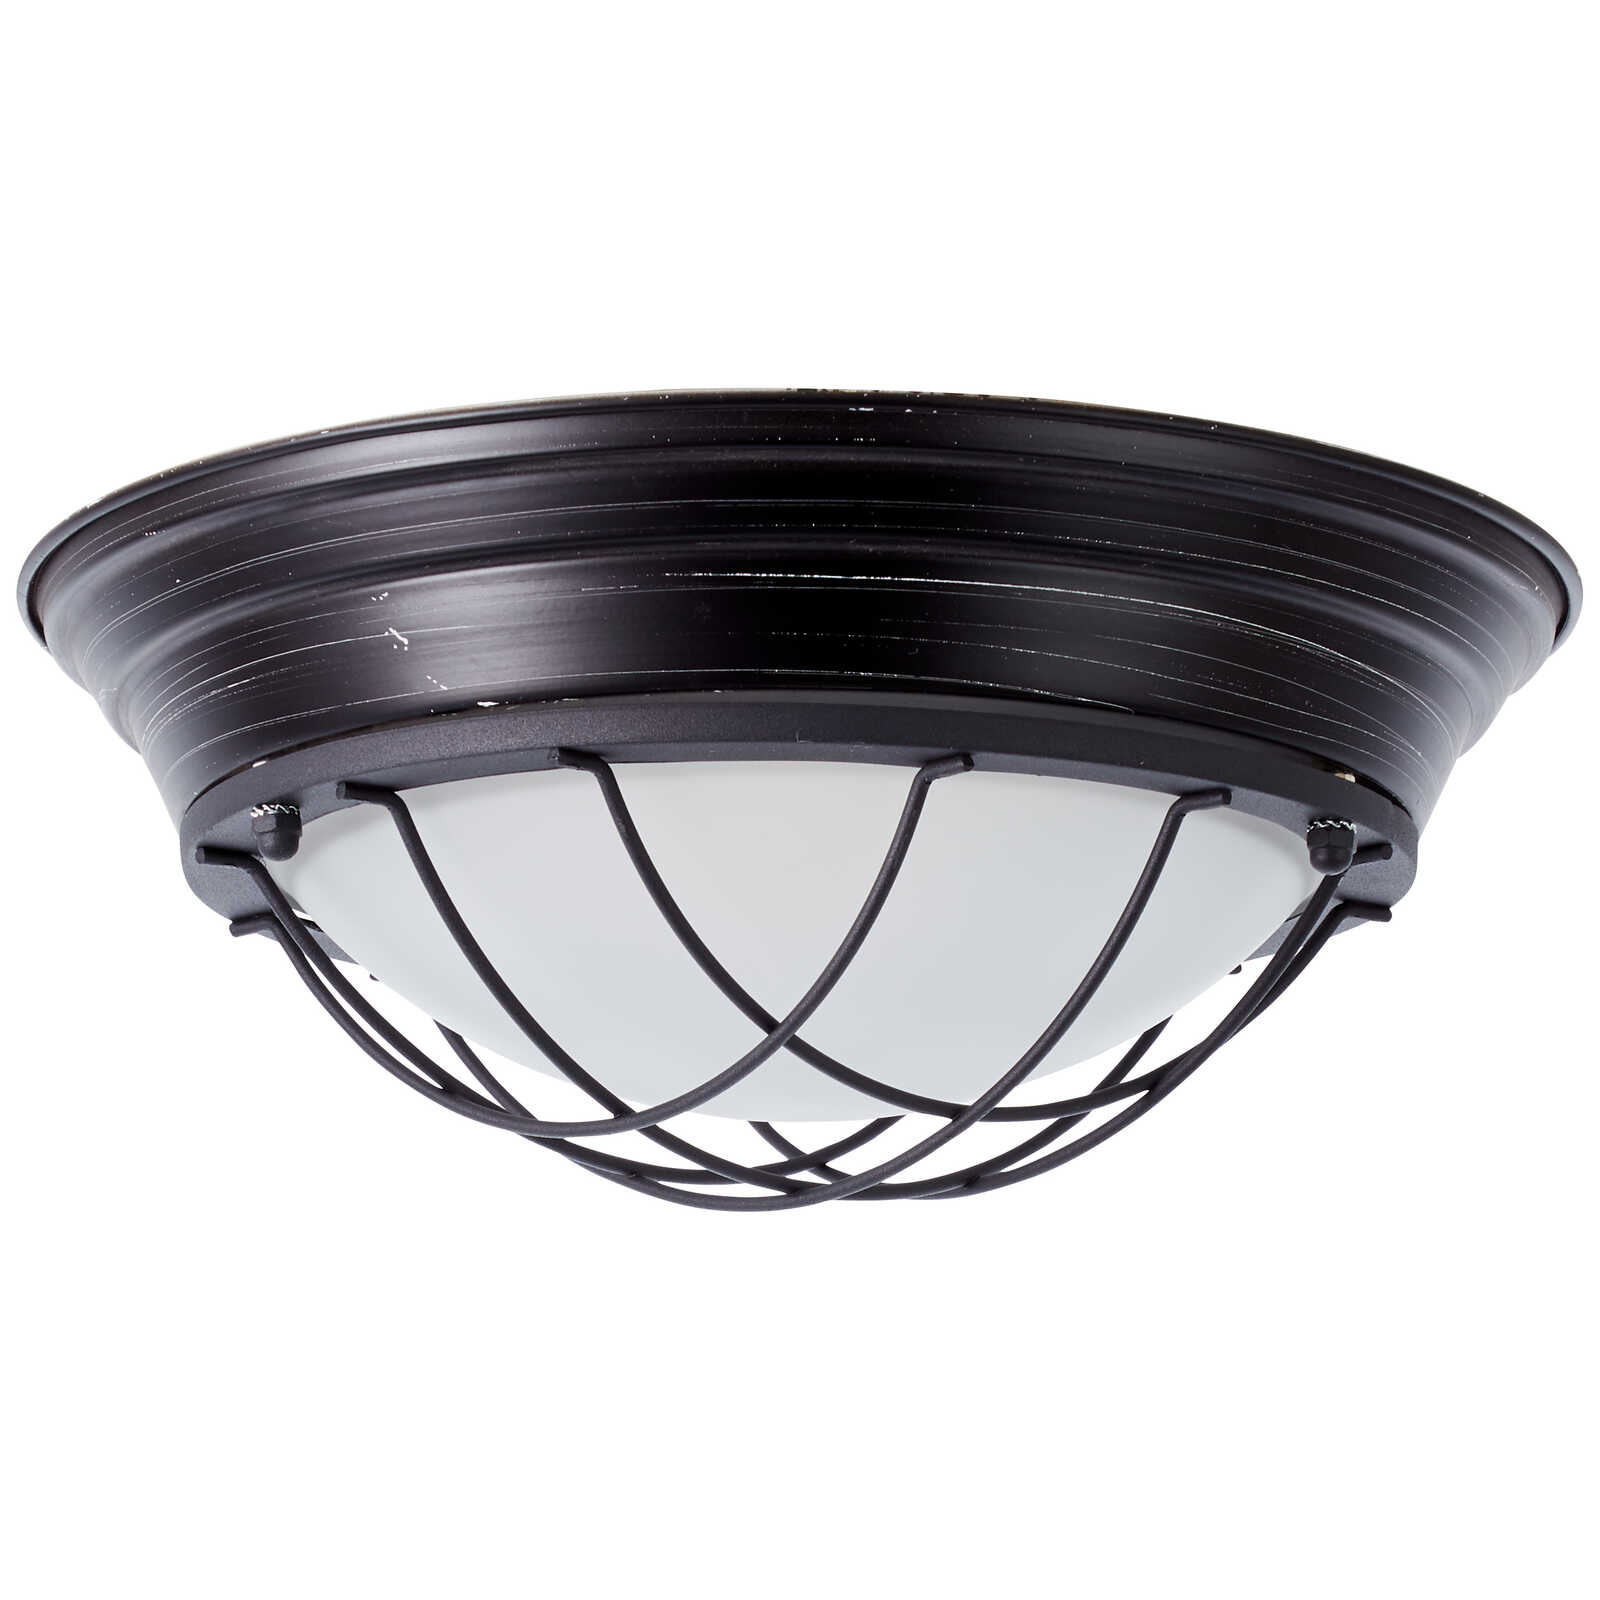             Glass wall and ceiling light - Sina 1 - Black
        